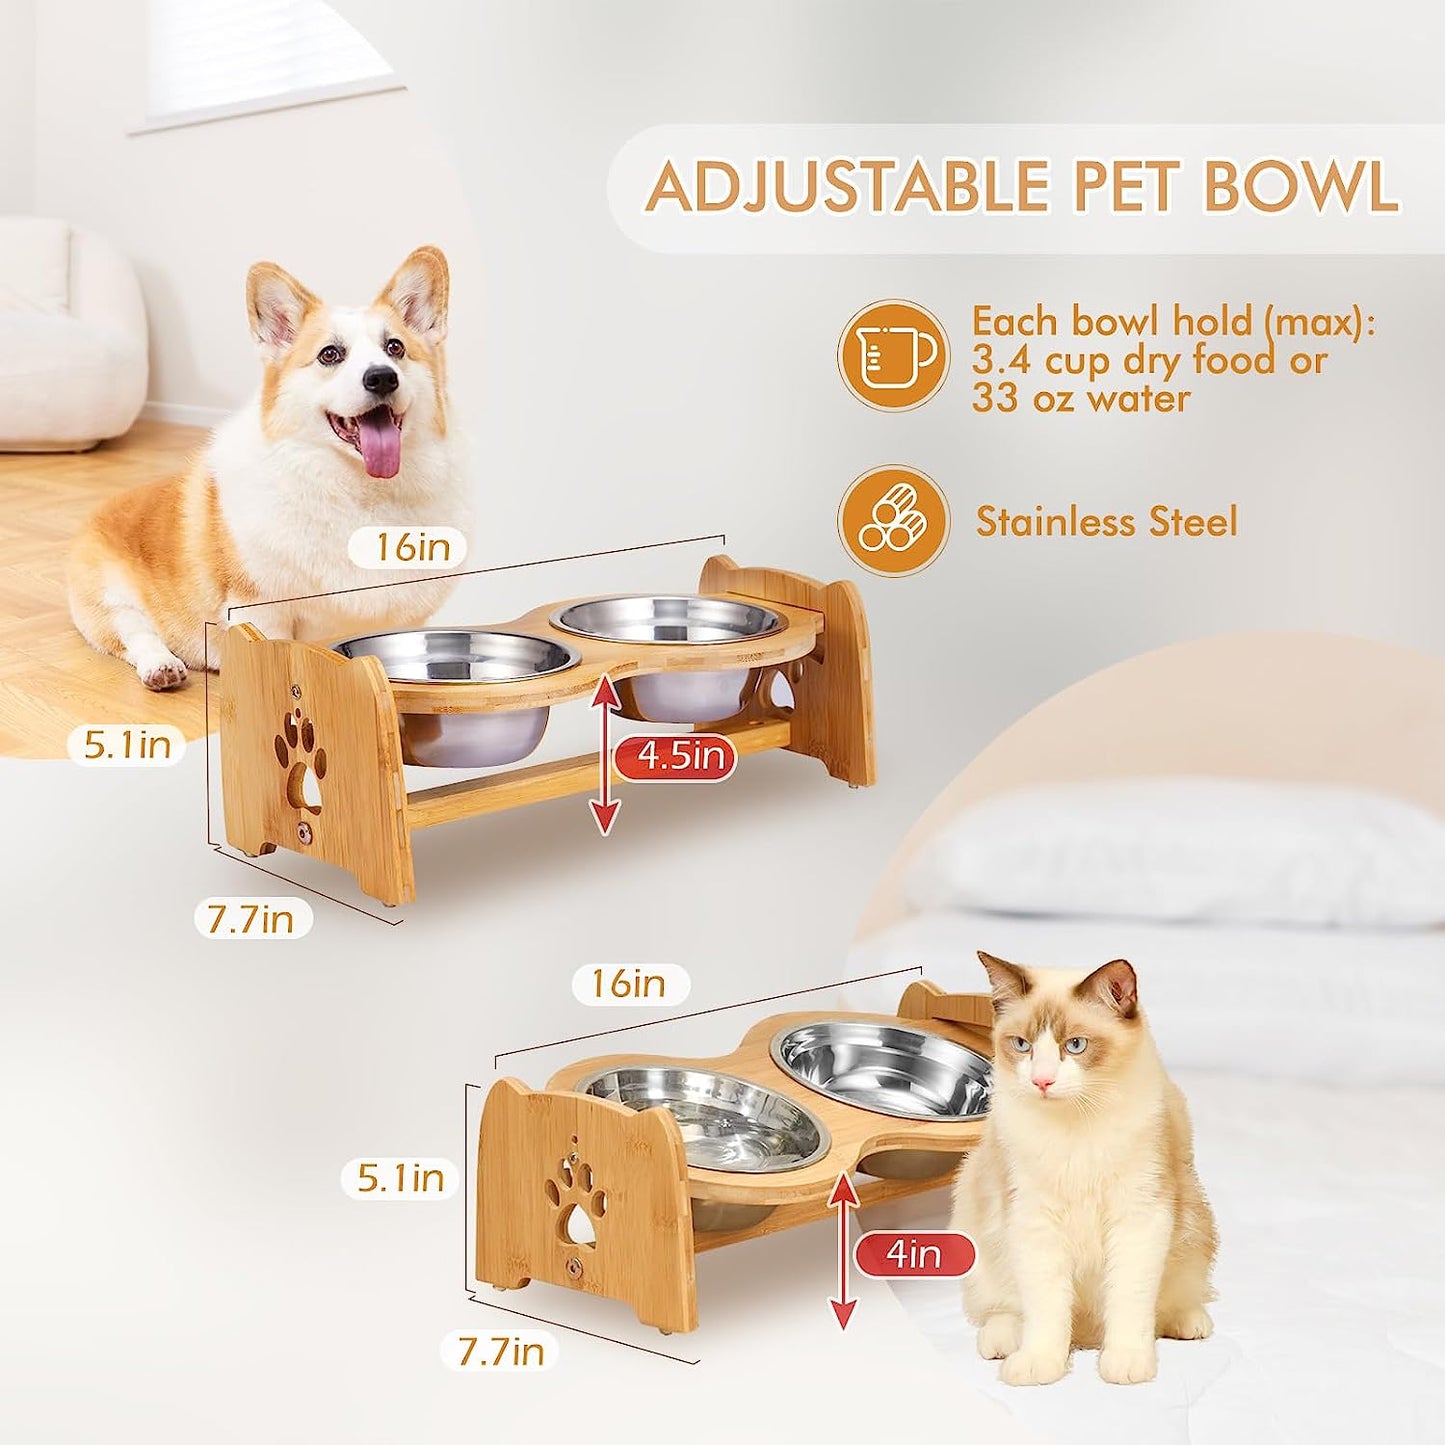 Elevated Dog Bowls for Cats and Dogs, Adjustable Bamboo Raised Dog Bowls for Small Dog, Food and Water Set Stand Feeder with 2 Stainless Steel Bowls and anti Slip Feet (Height 4" to 4.5")